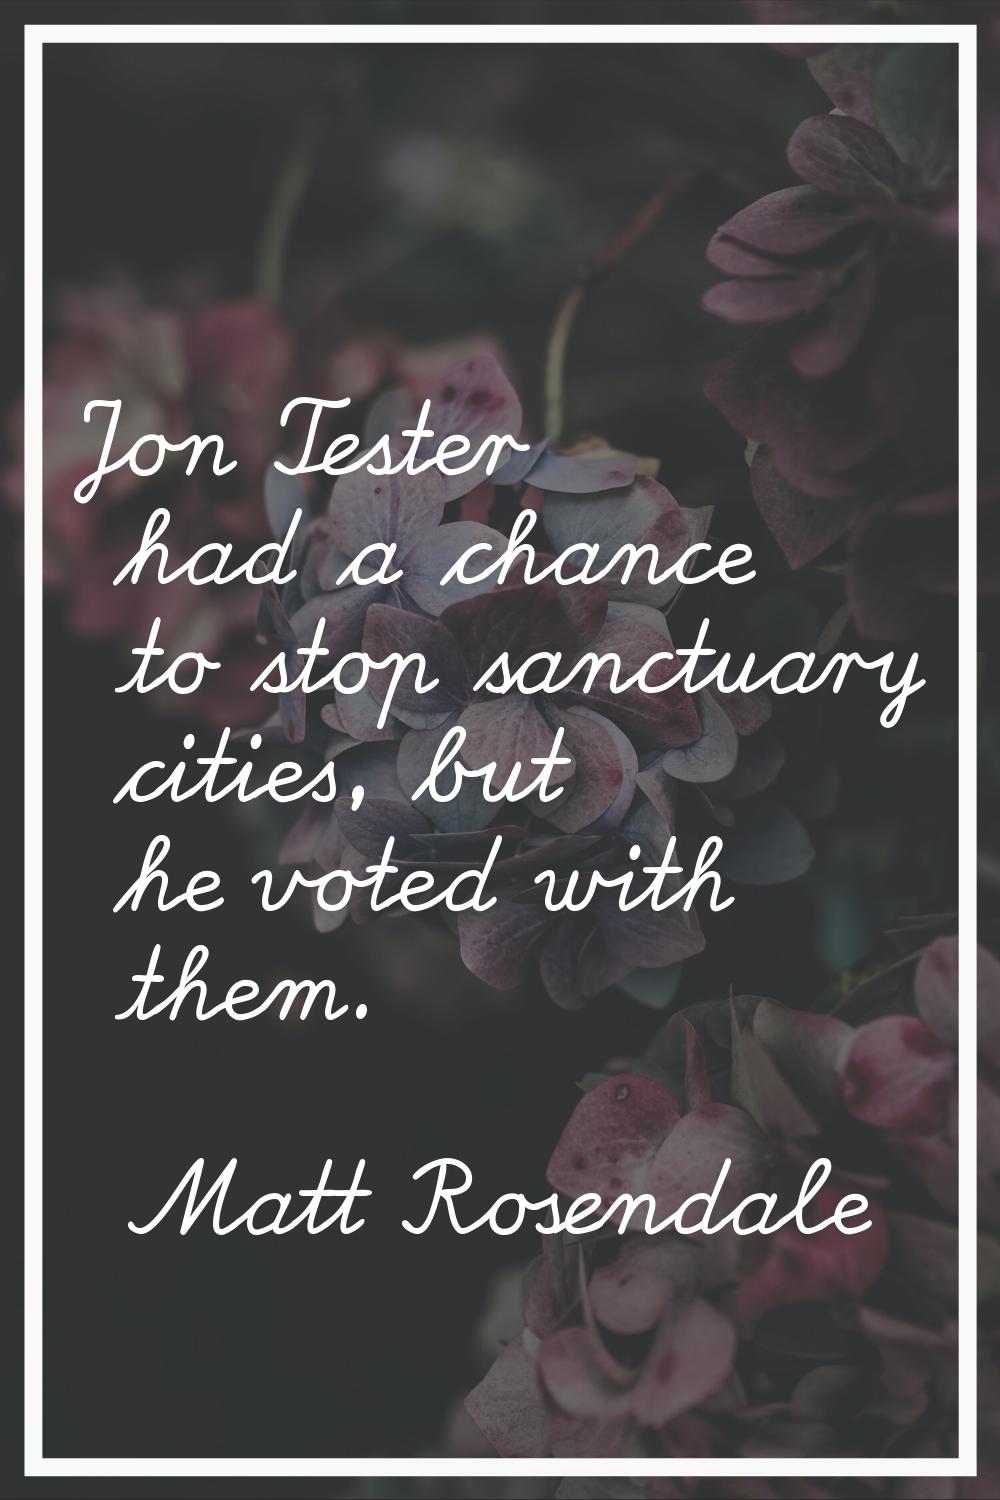 Jon Tester had a chance to stop sanctuary cities, but he voted with them.